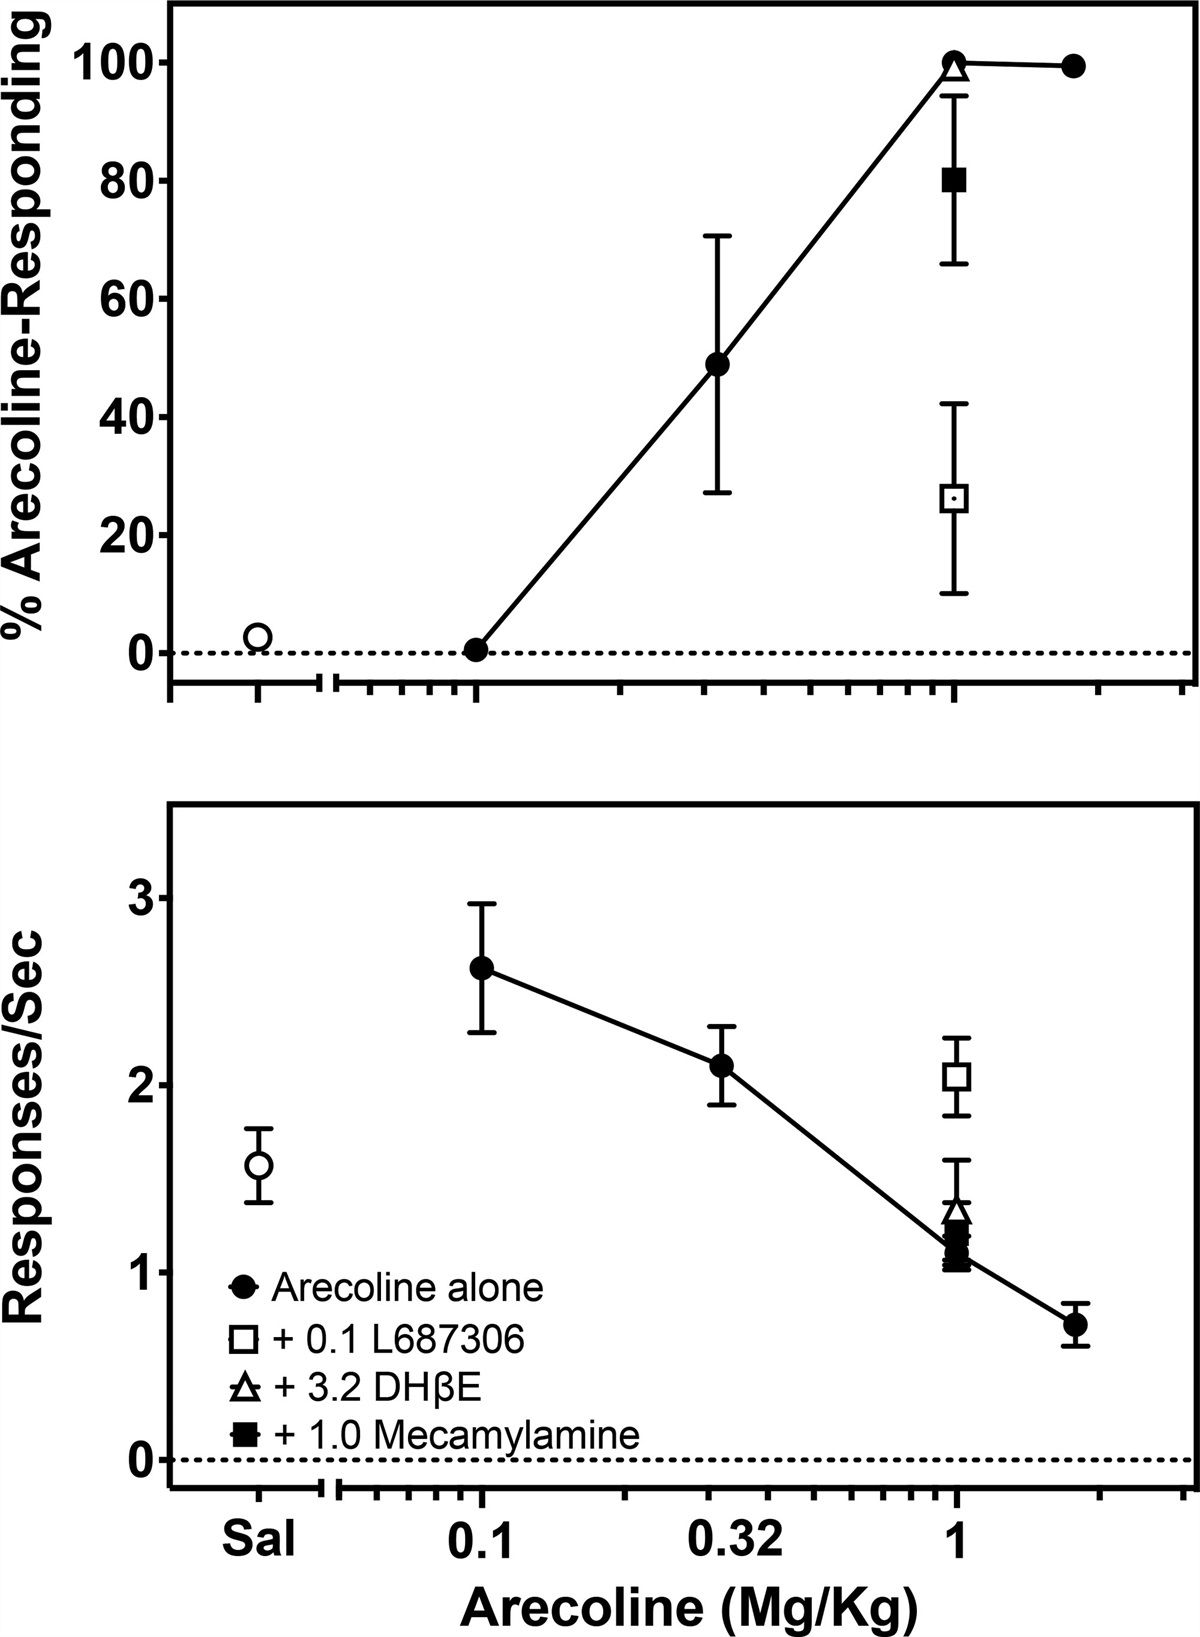 Nicotinic aspects of the discriminative stimulus effects of arecoline